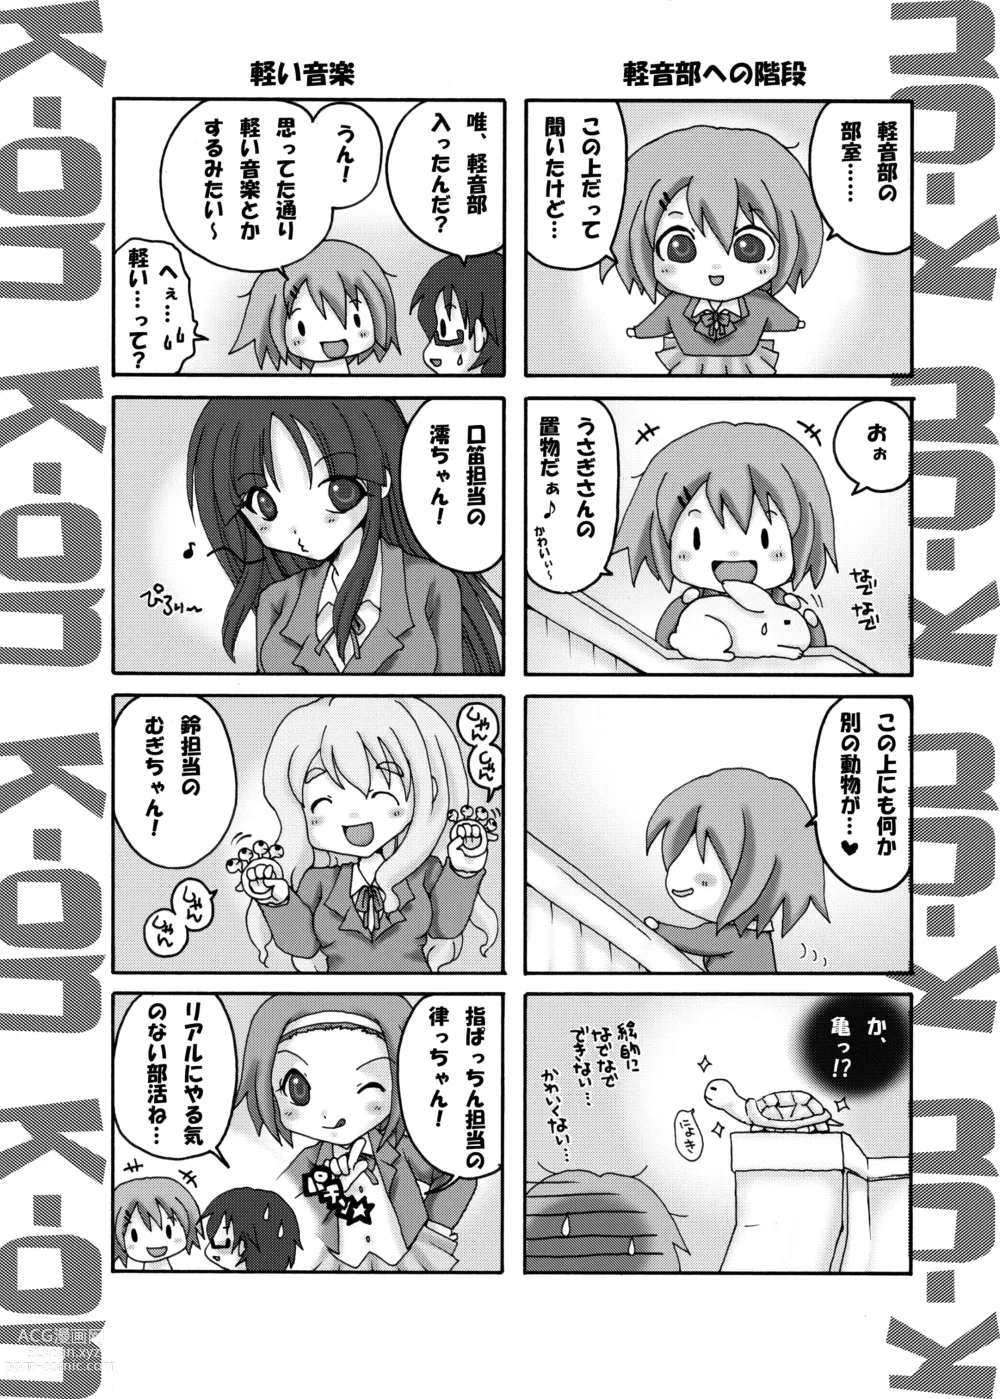 Page 10 of doujinshi Houkago Love Time